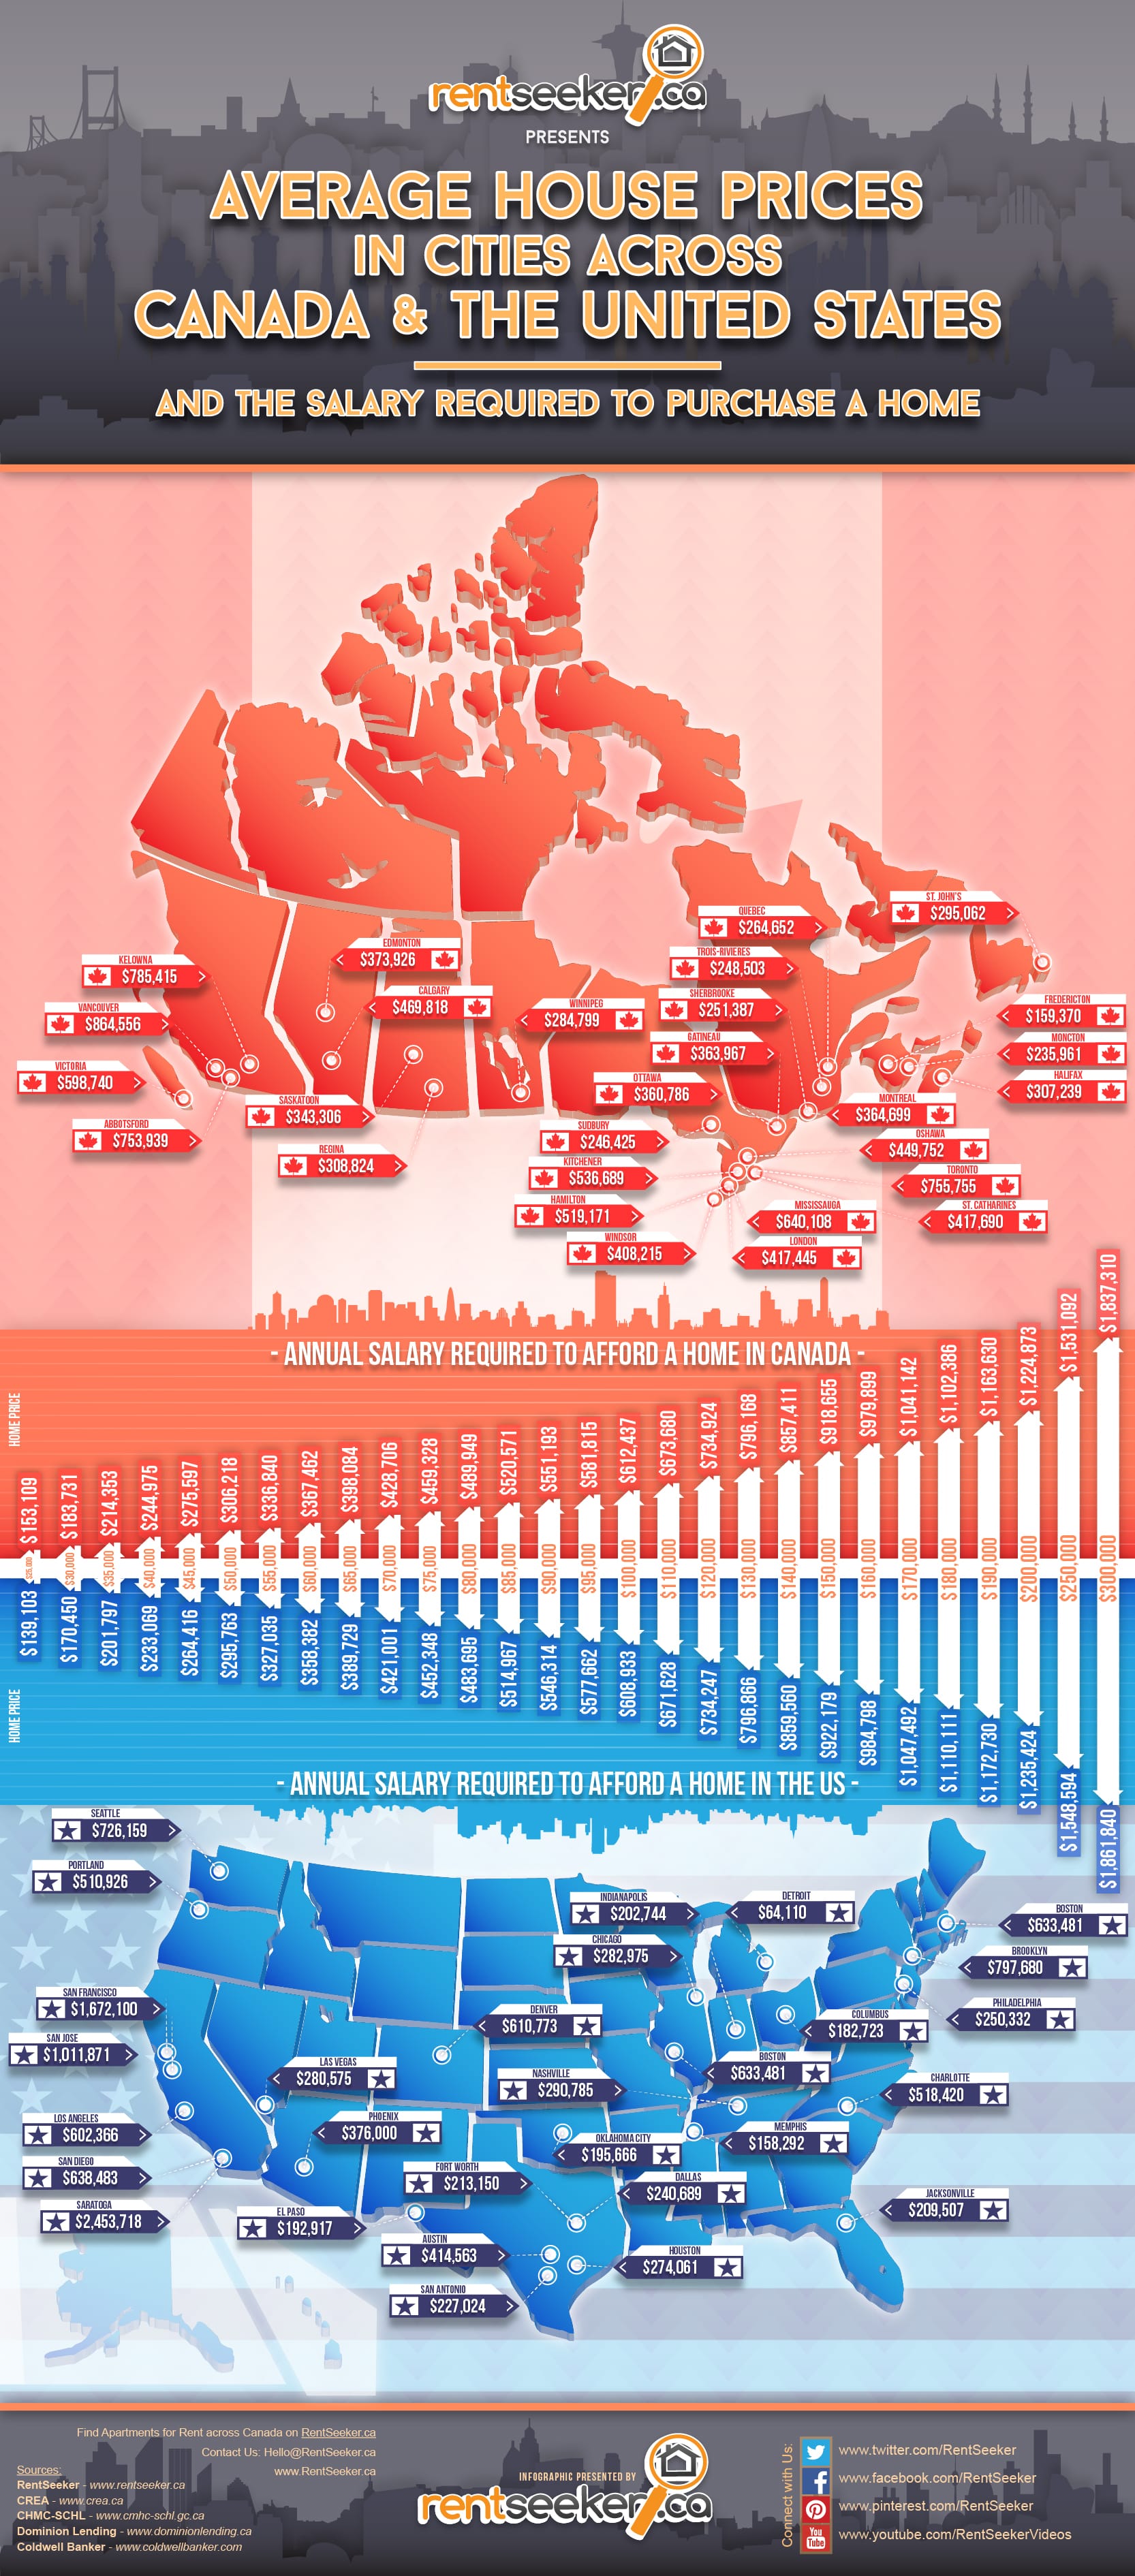 comparing-the-cost-of-housing-in-canada-vs-the-us-and-the-salary-and-income-needed-by-rentseeker